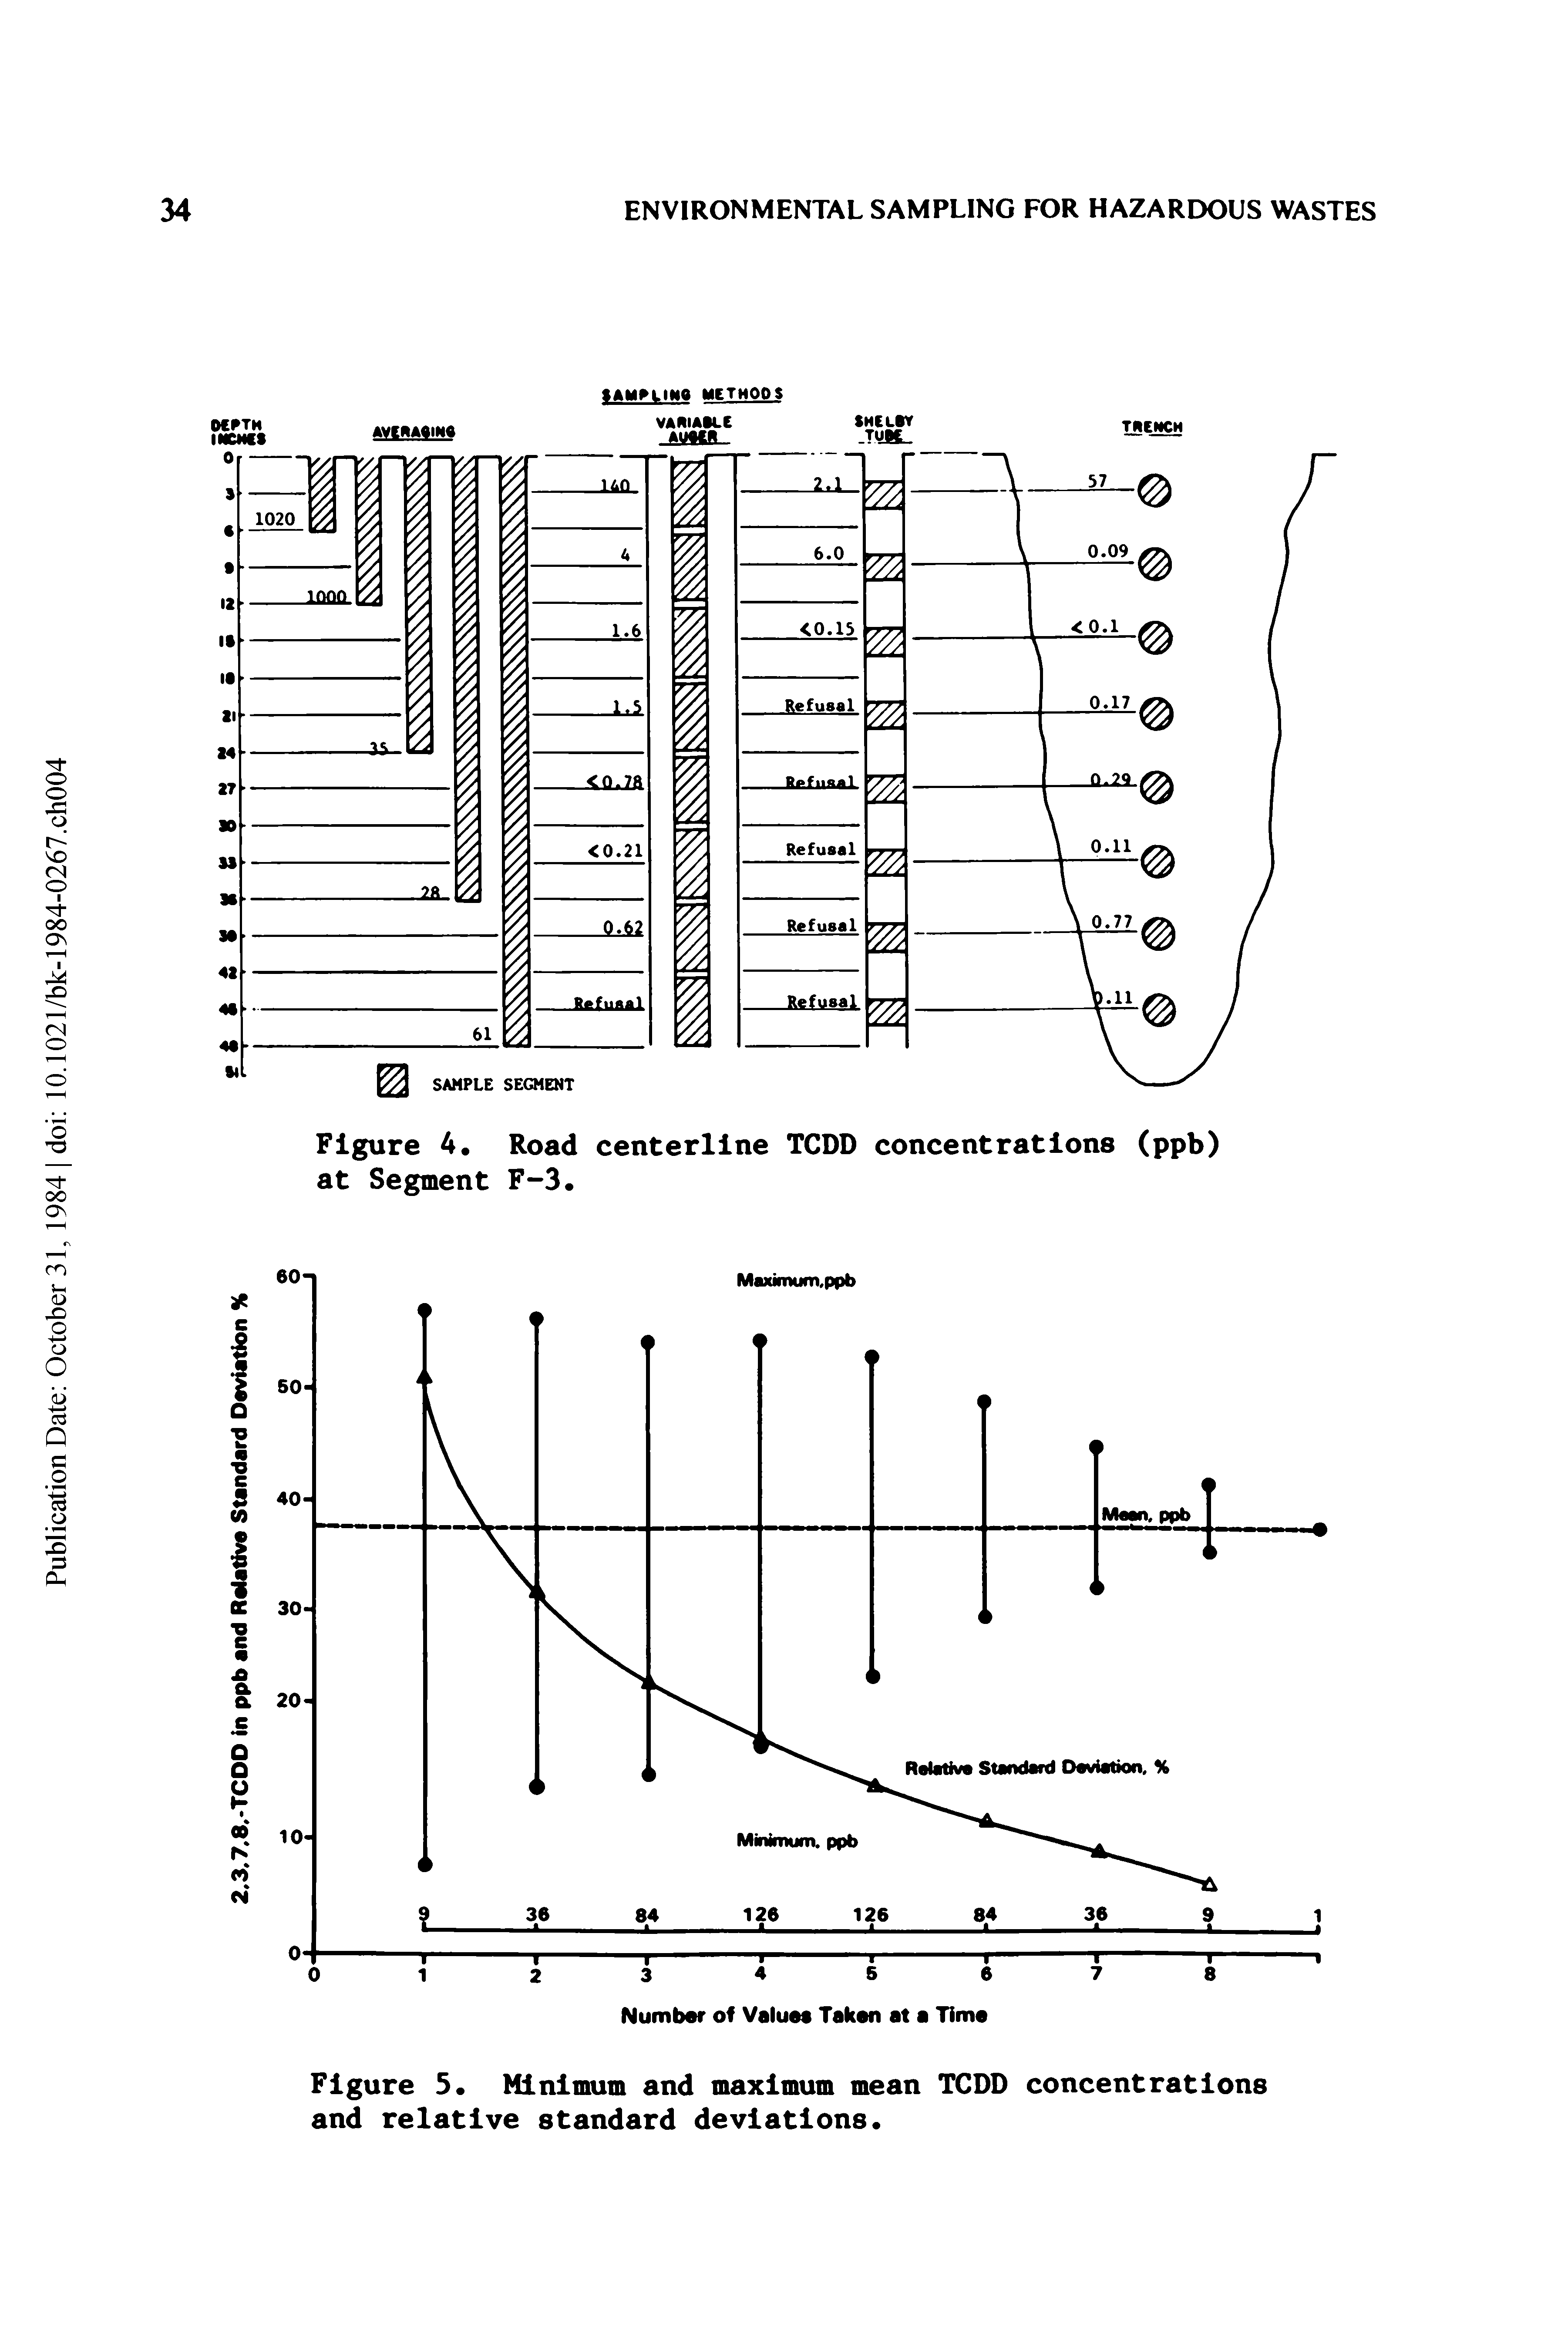 Figure 5. Minimum and maximum mean TCDD concentrations and relative standard deviations.